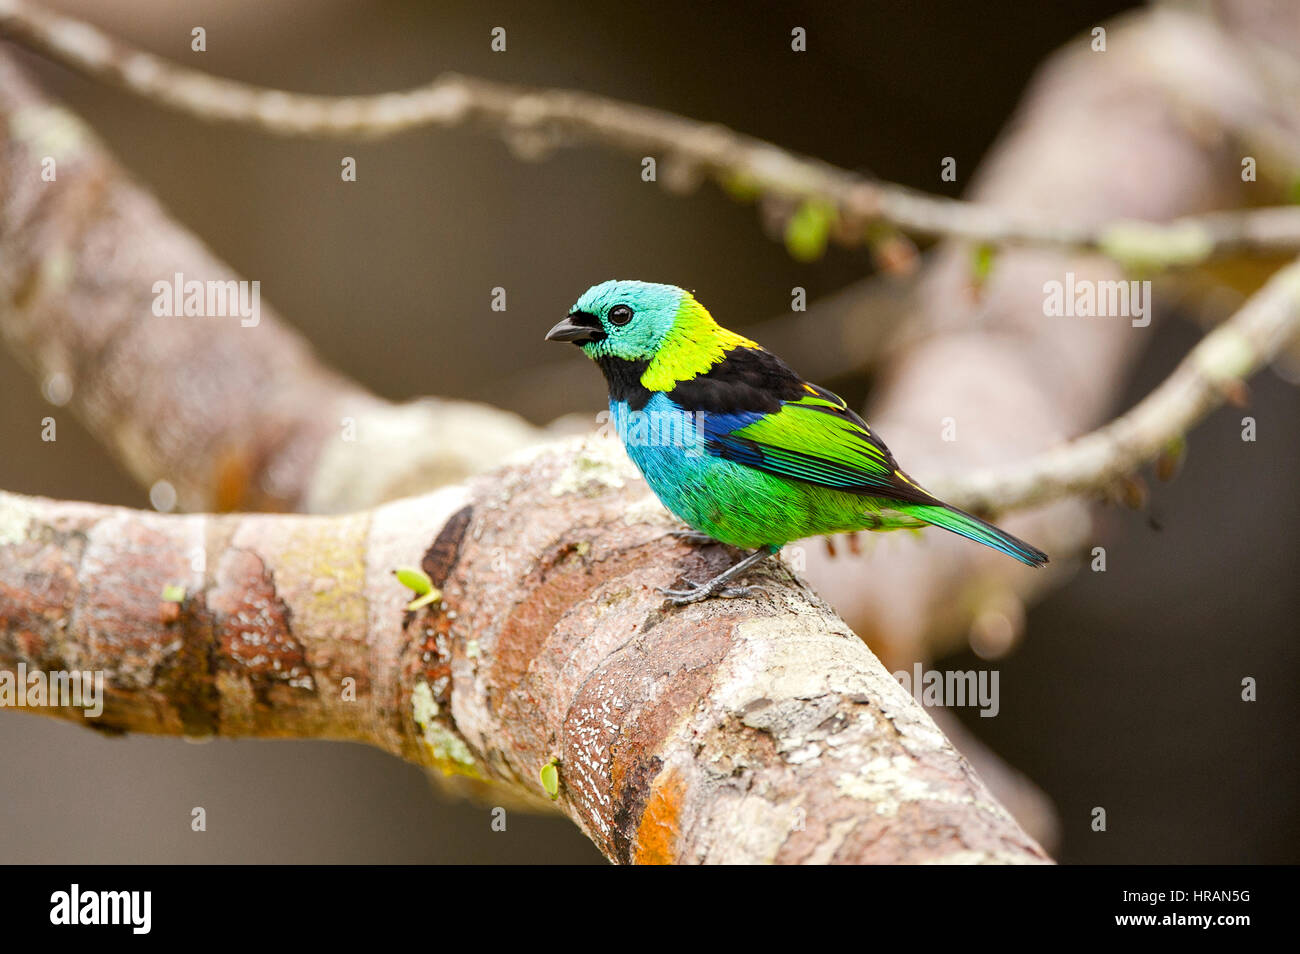 Close-up of a Green-headed Tanager (Tangara seledon) perched on a tree branch, photographed in Sooretama, Espírito Santo, Brazil.. Stock Photo